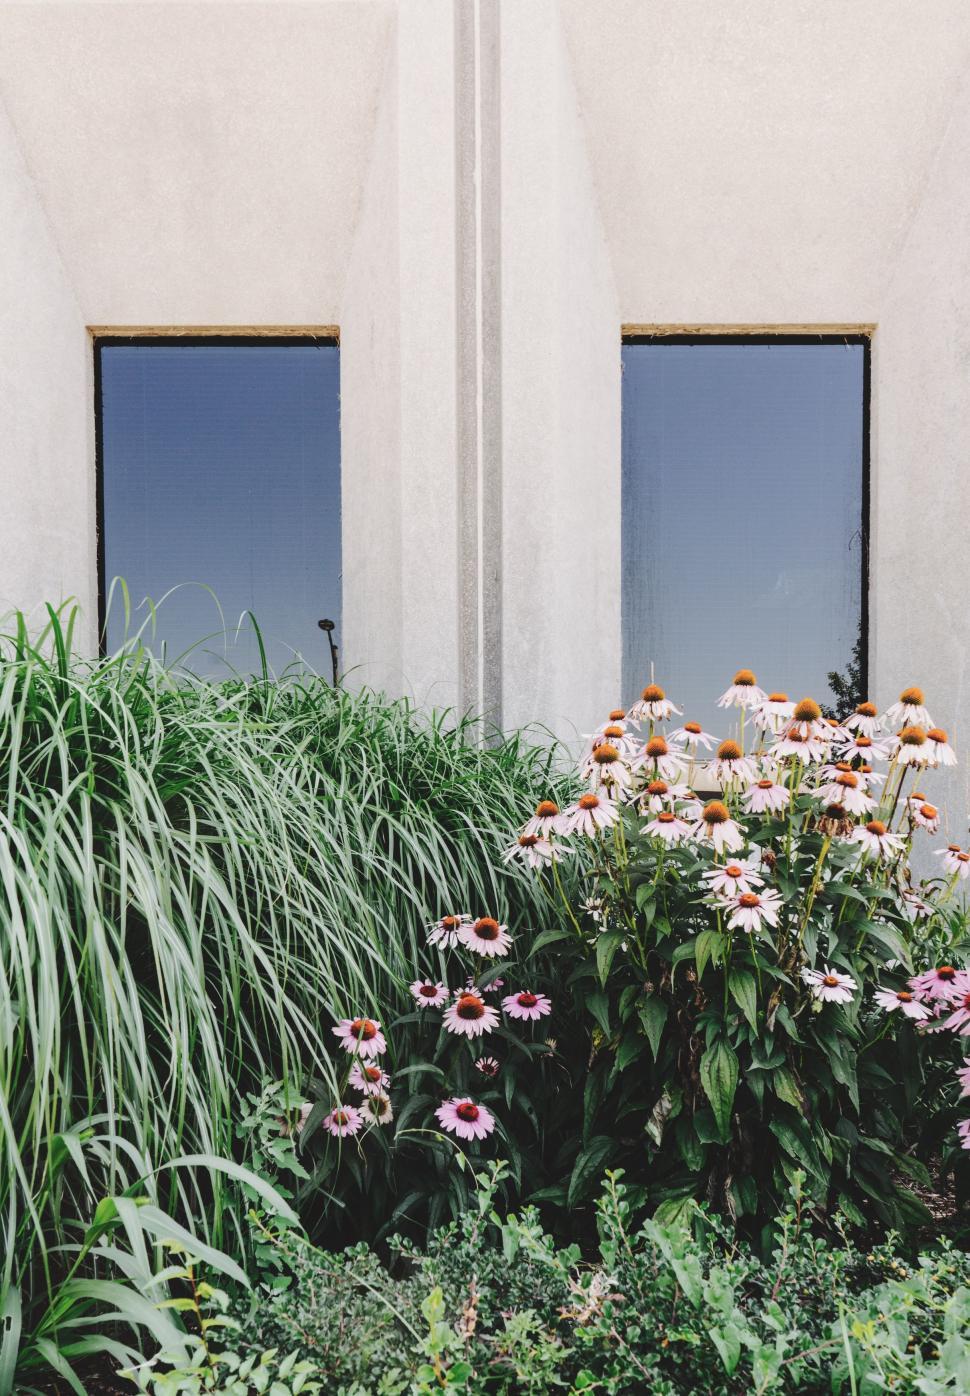 Free Image of Bunch of Flowers in Front of Building 